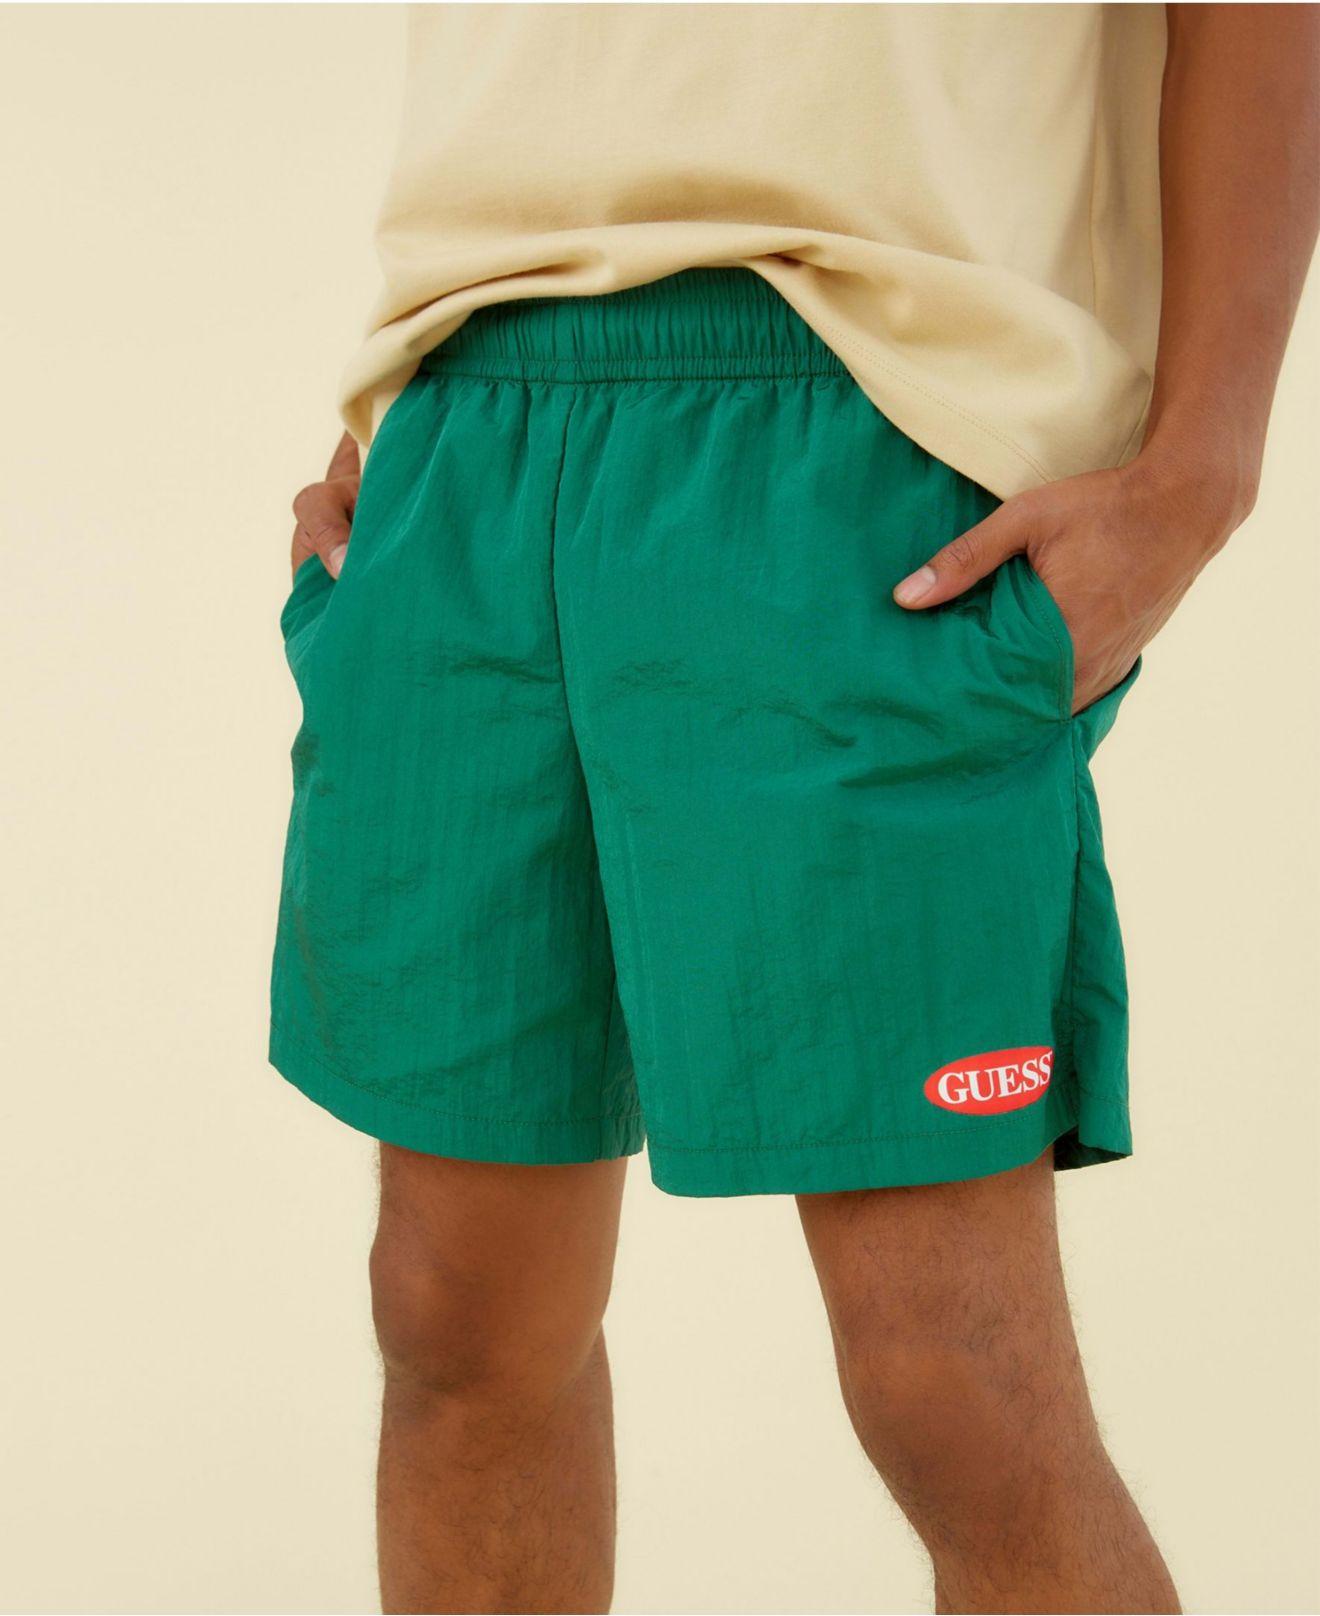 Guess Synthetic Originals Nylon Logo Shorts in Green for Men - Lyst